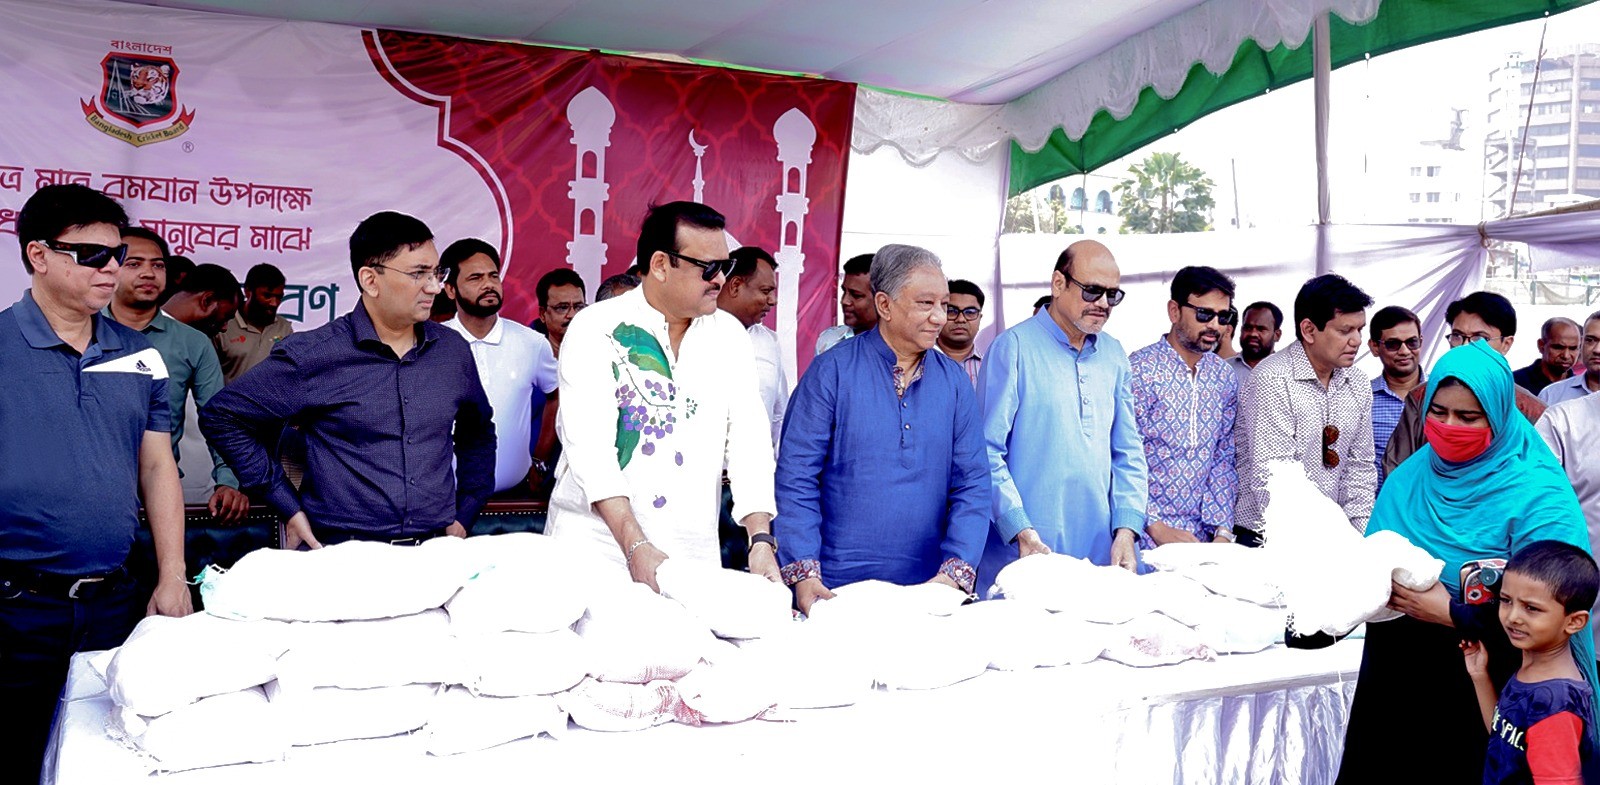 Bangladesh Cricket Board (BCB) distributed food and grocery packs to the less fortunate people